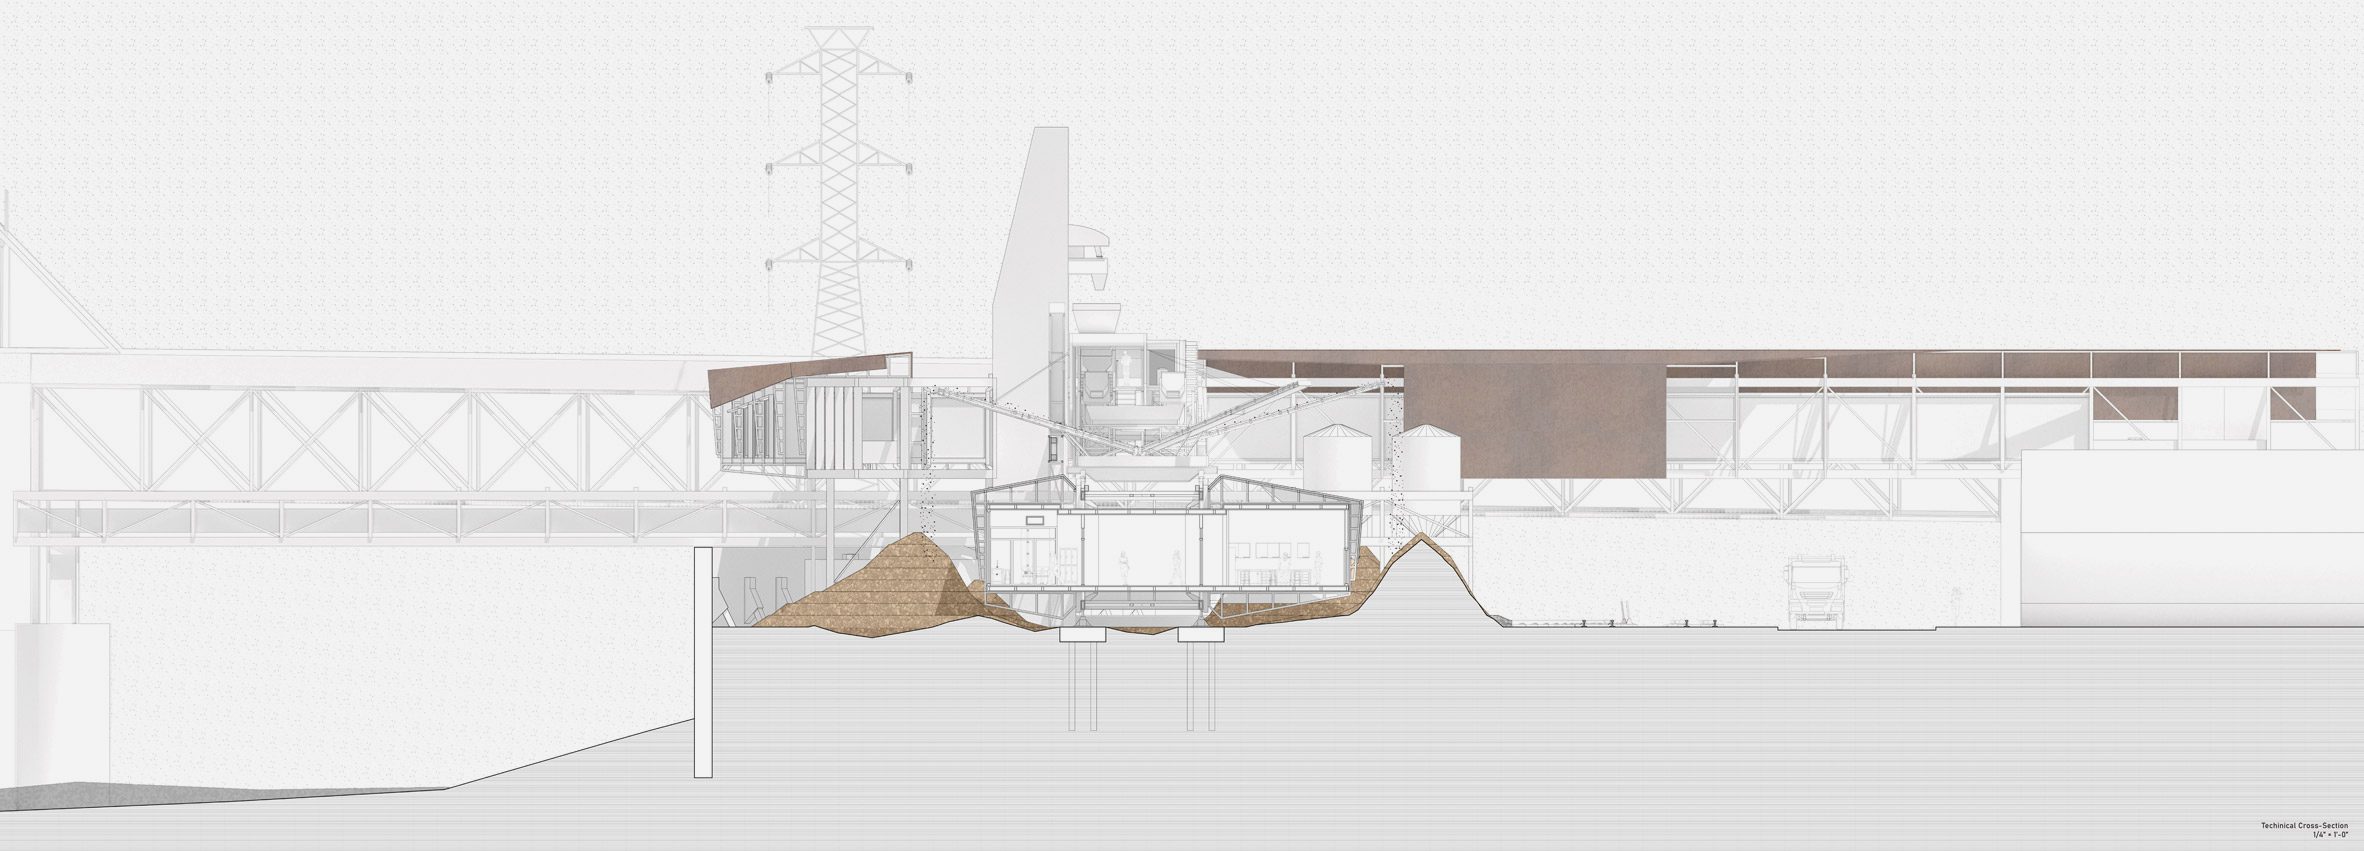 Section drawing of a wasteland reuse project